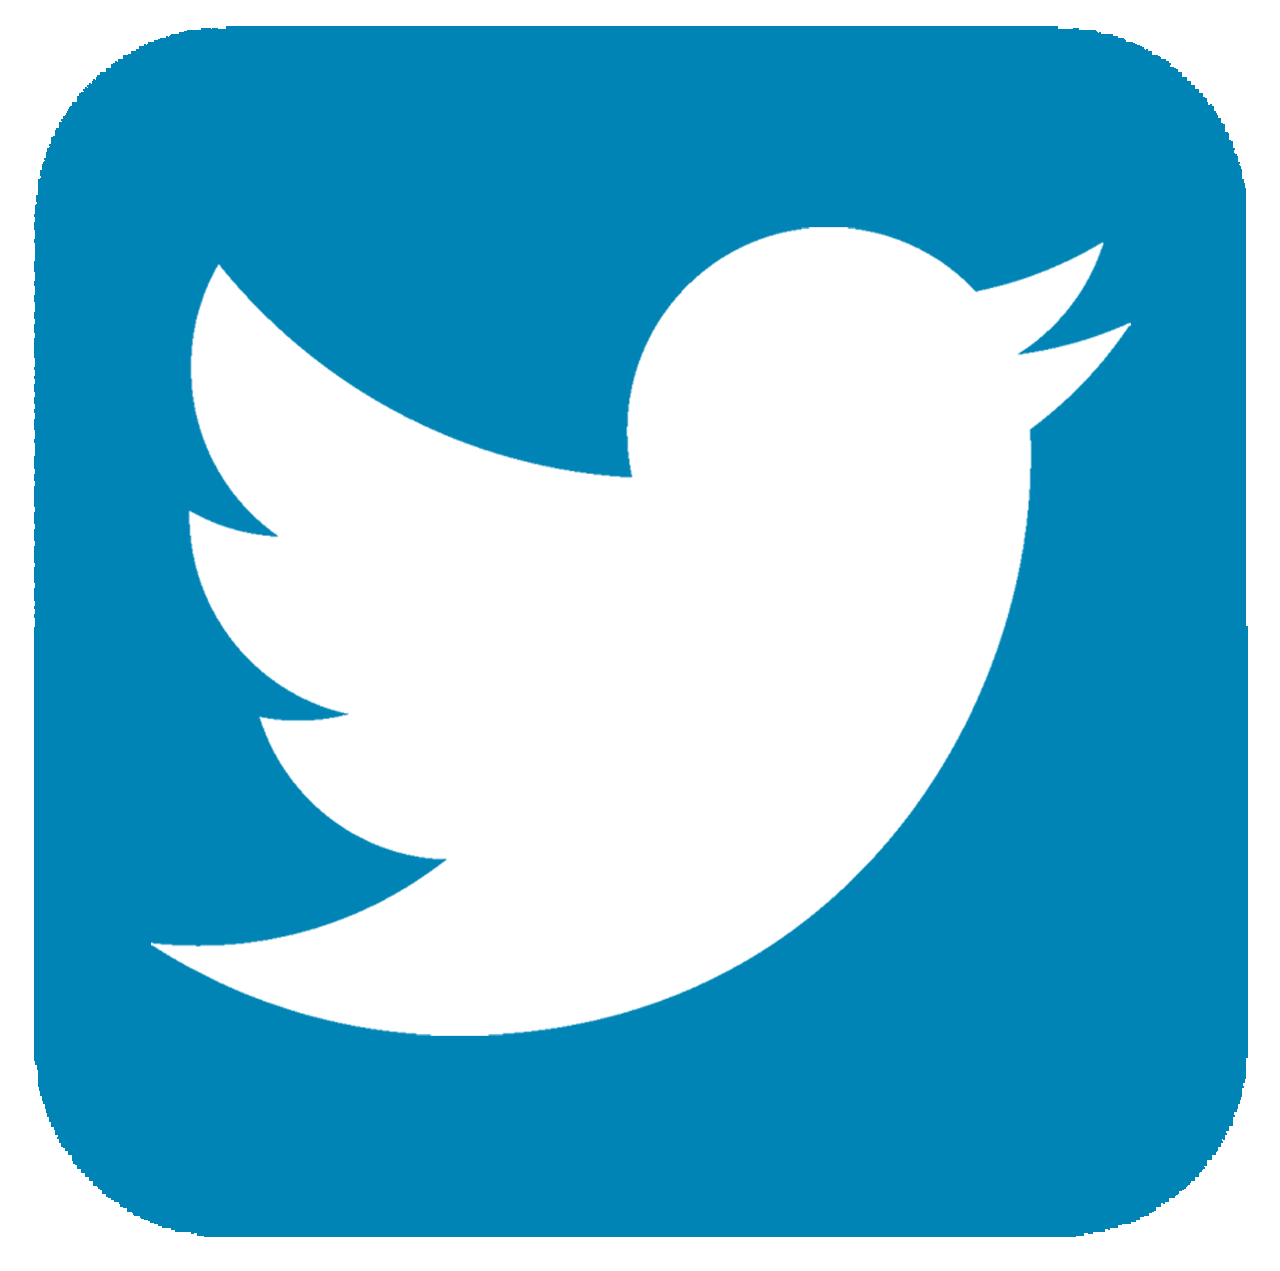 Blue Twitter Logo - Twitter small logo png 6 » PNG Image